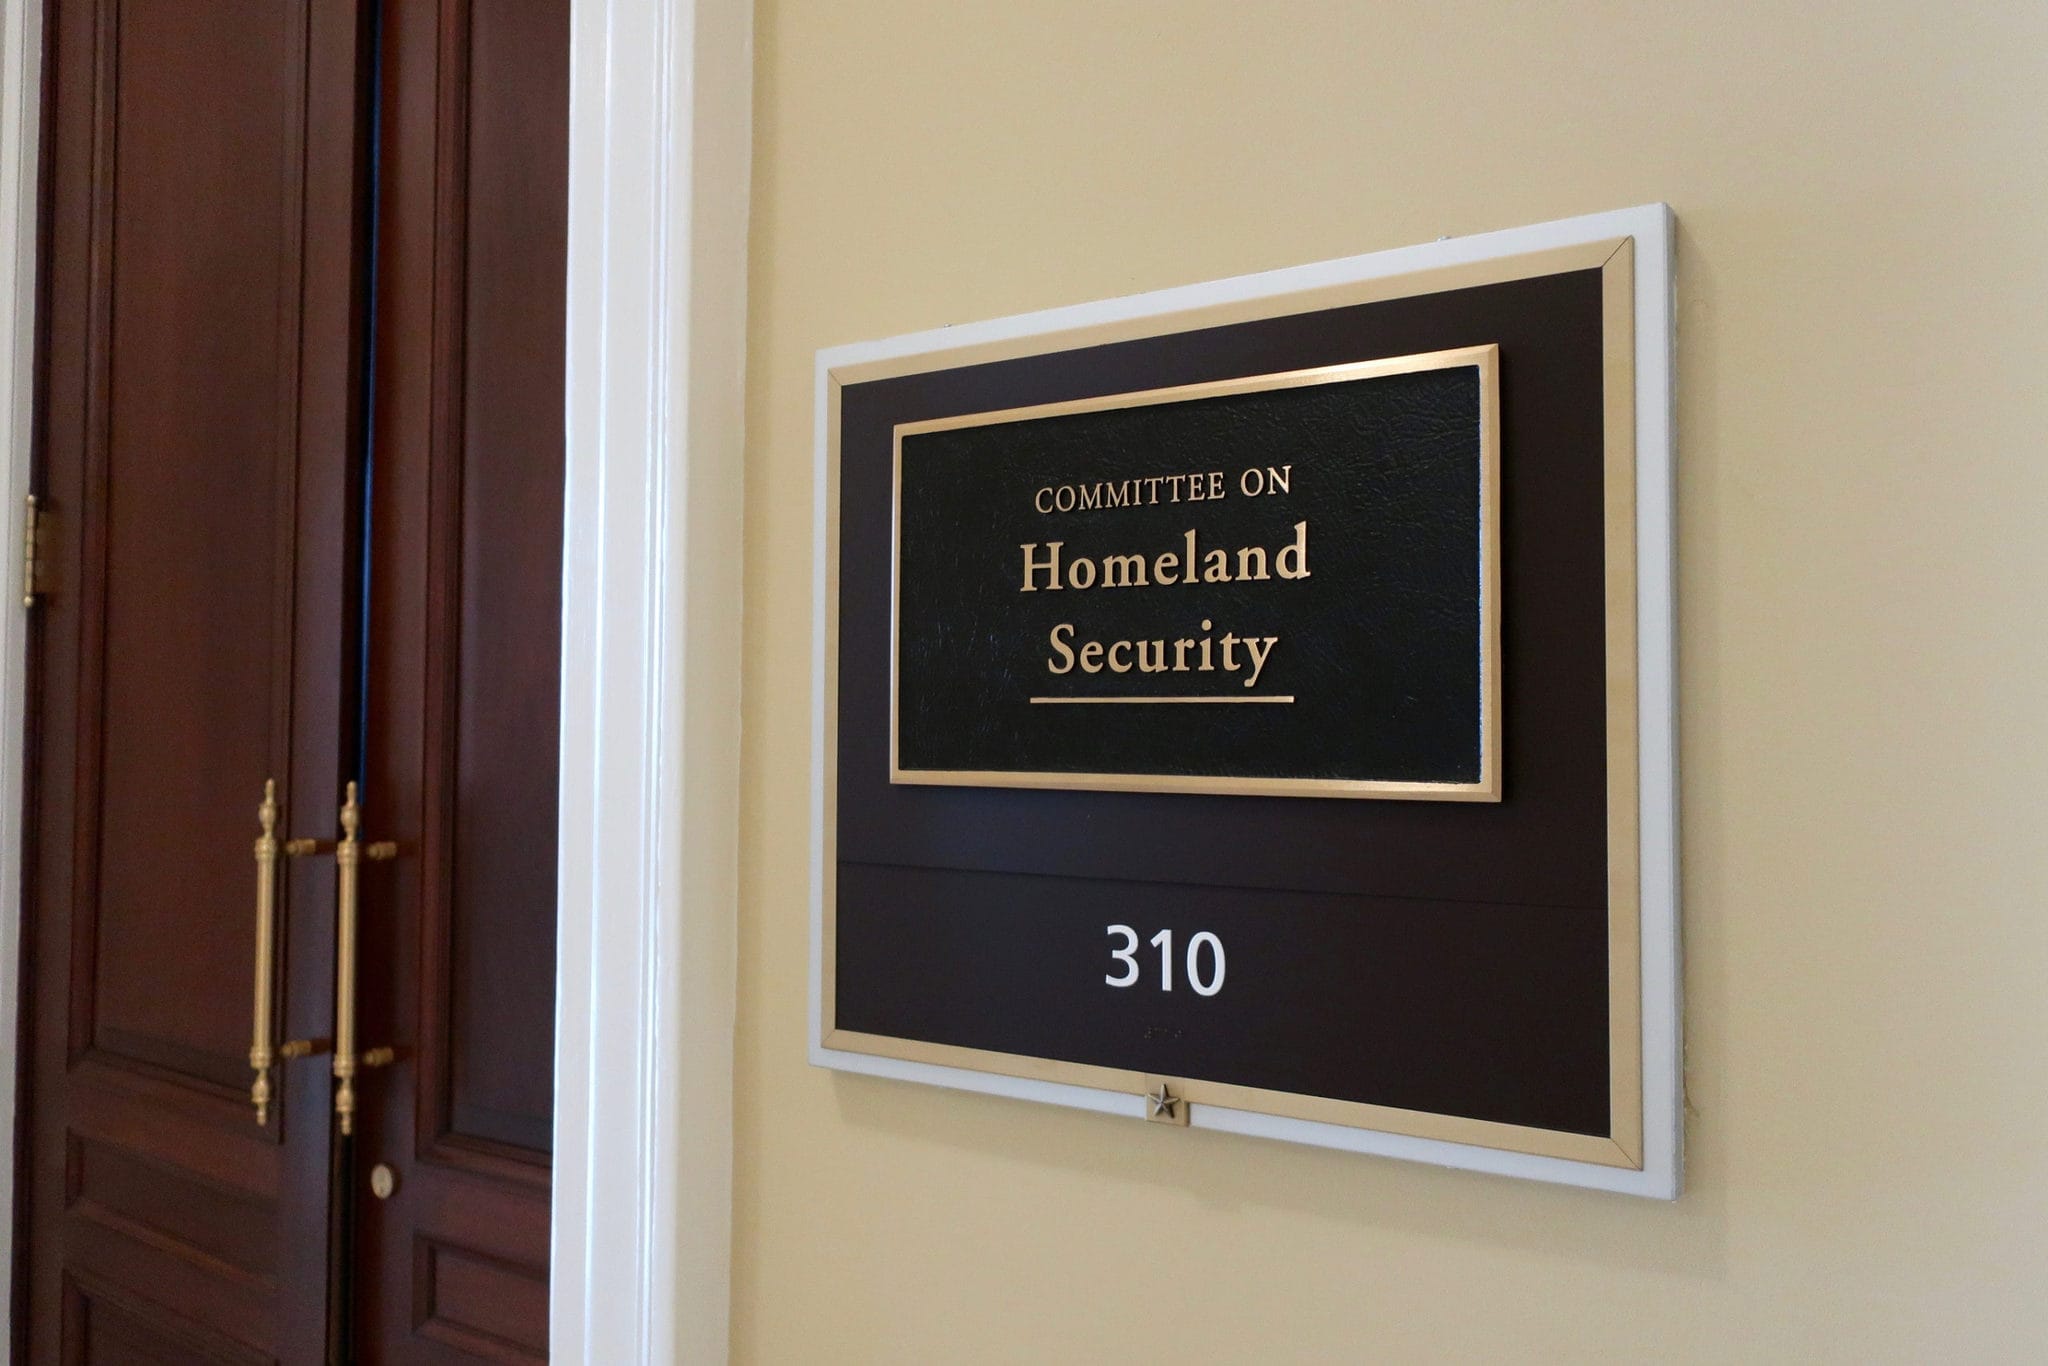 U.S. House of Representatives Committee on Homeland Security sign outside meeting room